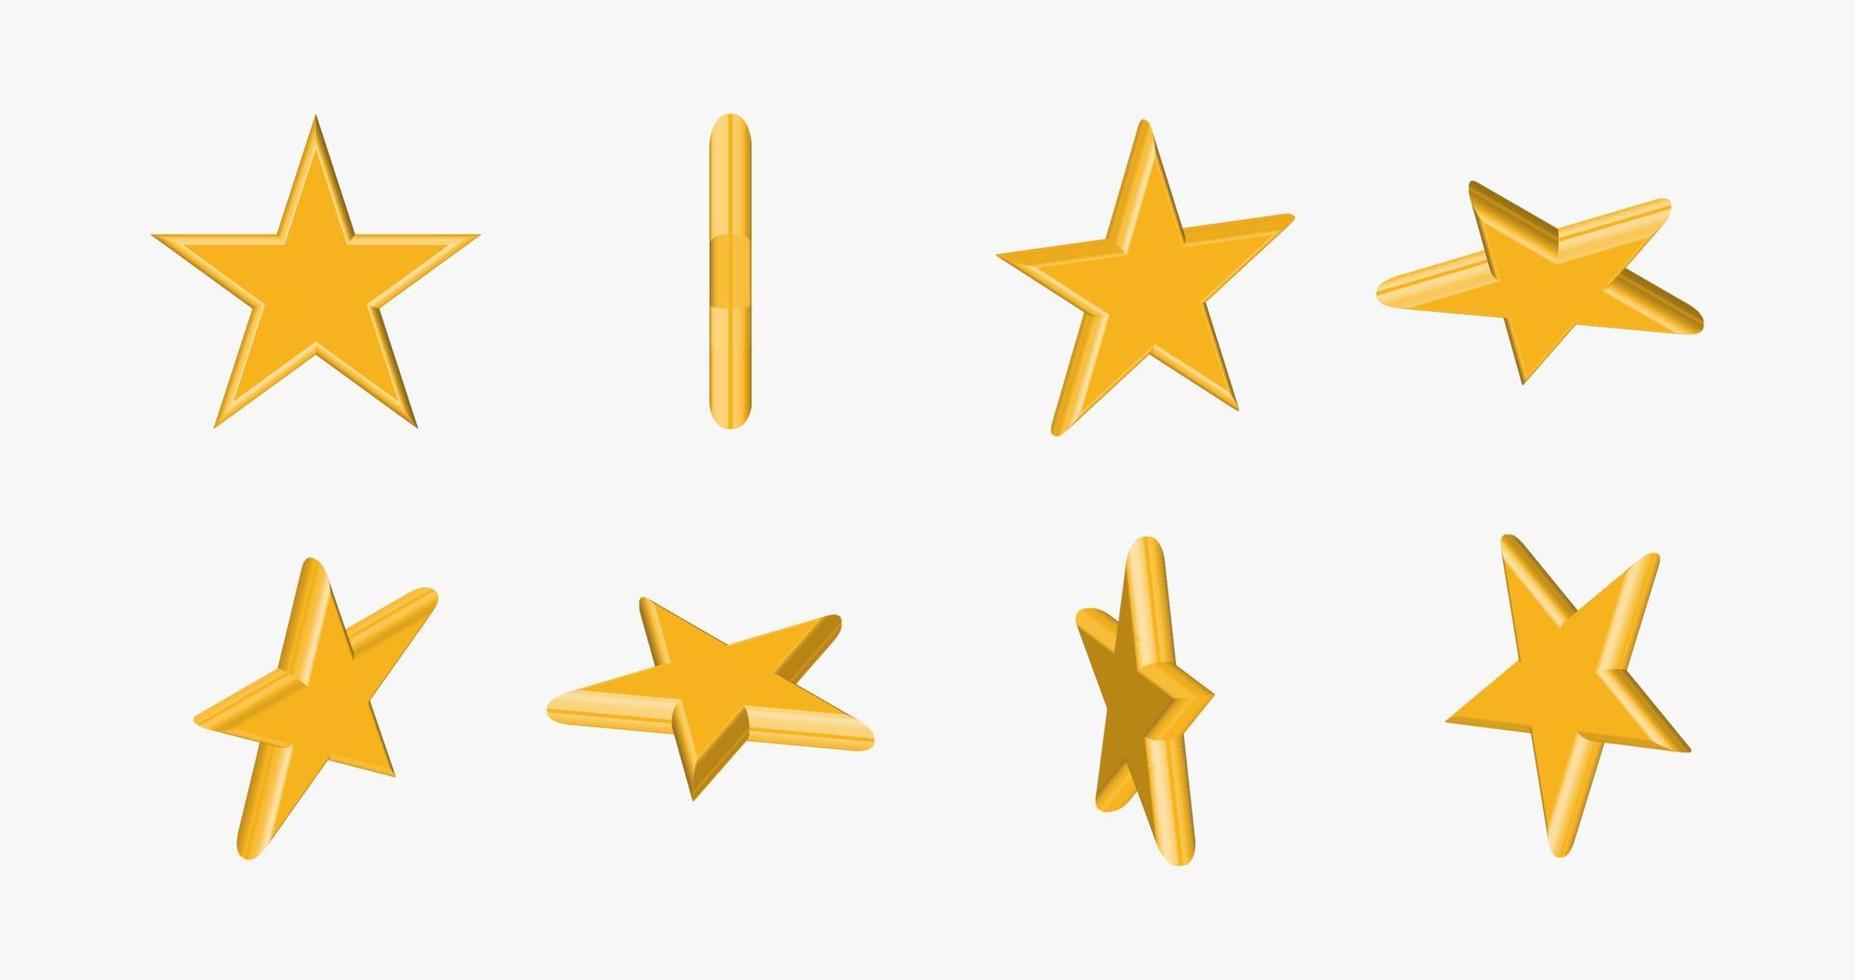 Star of different shapes, bright yellow color. vector